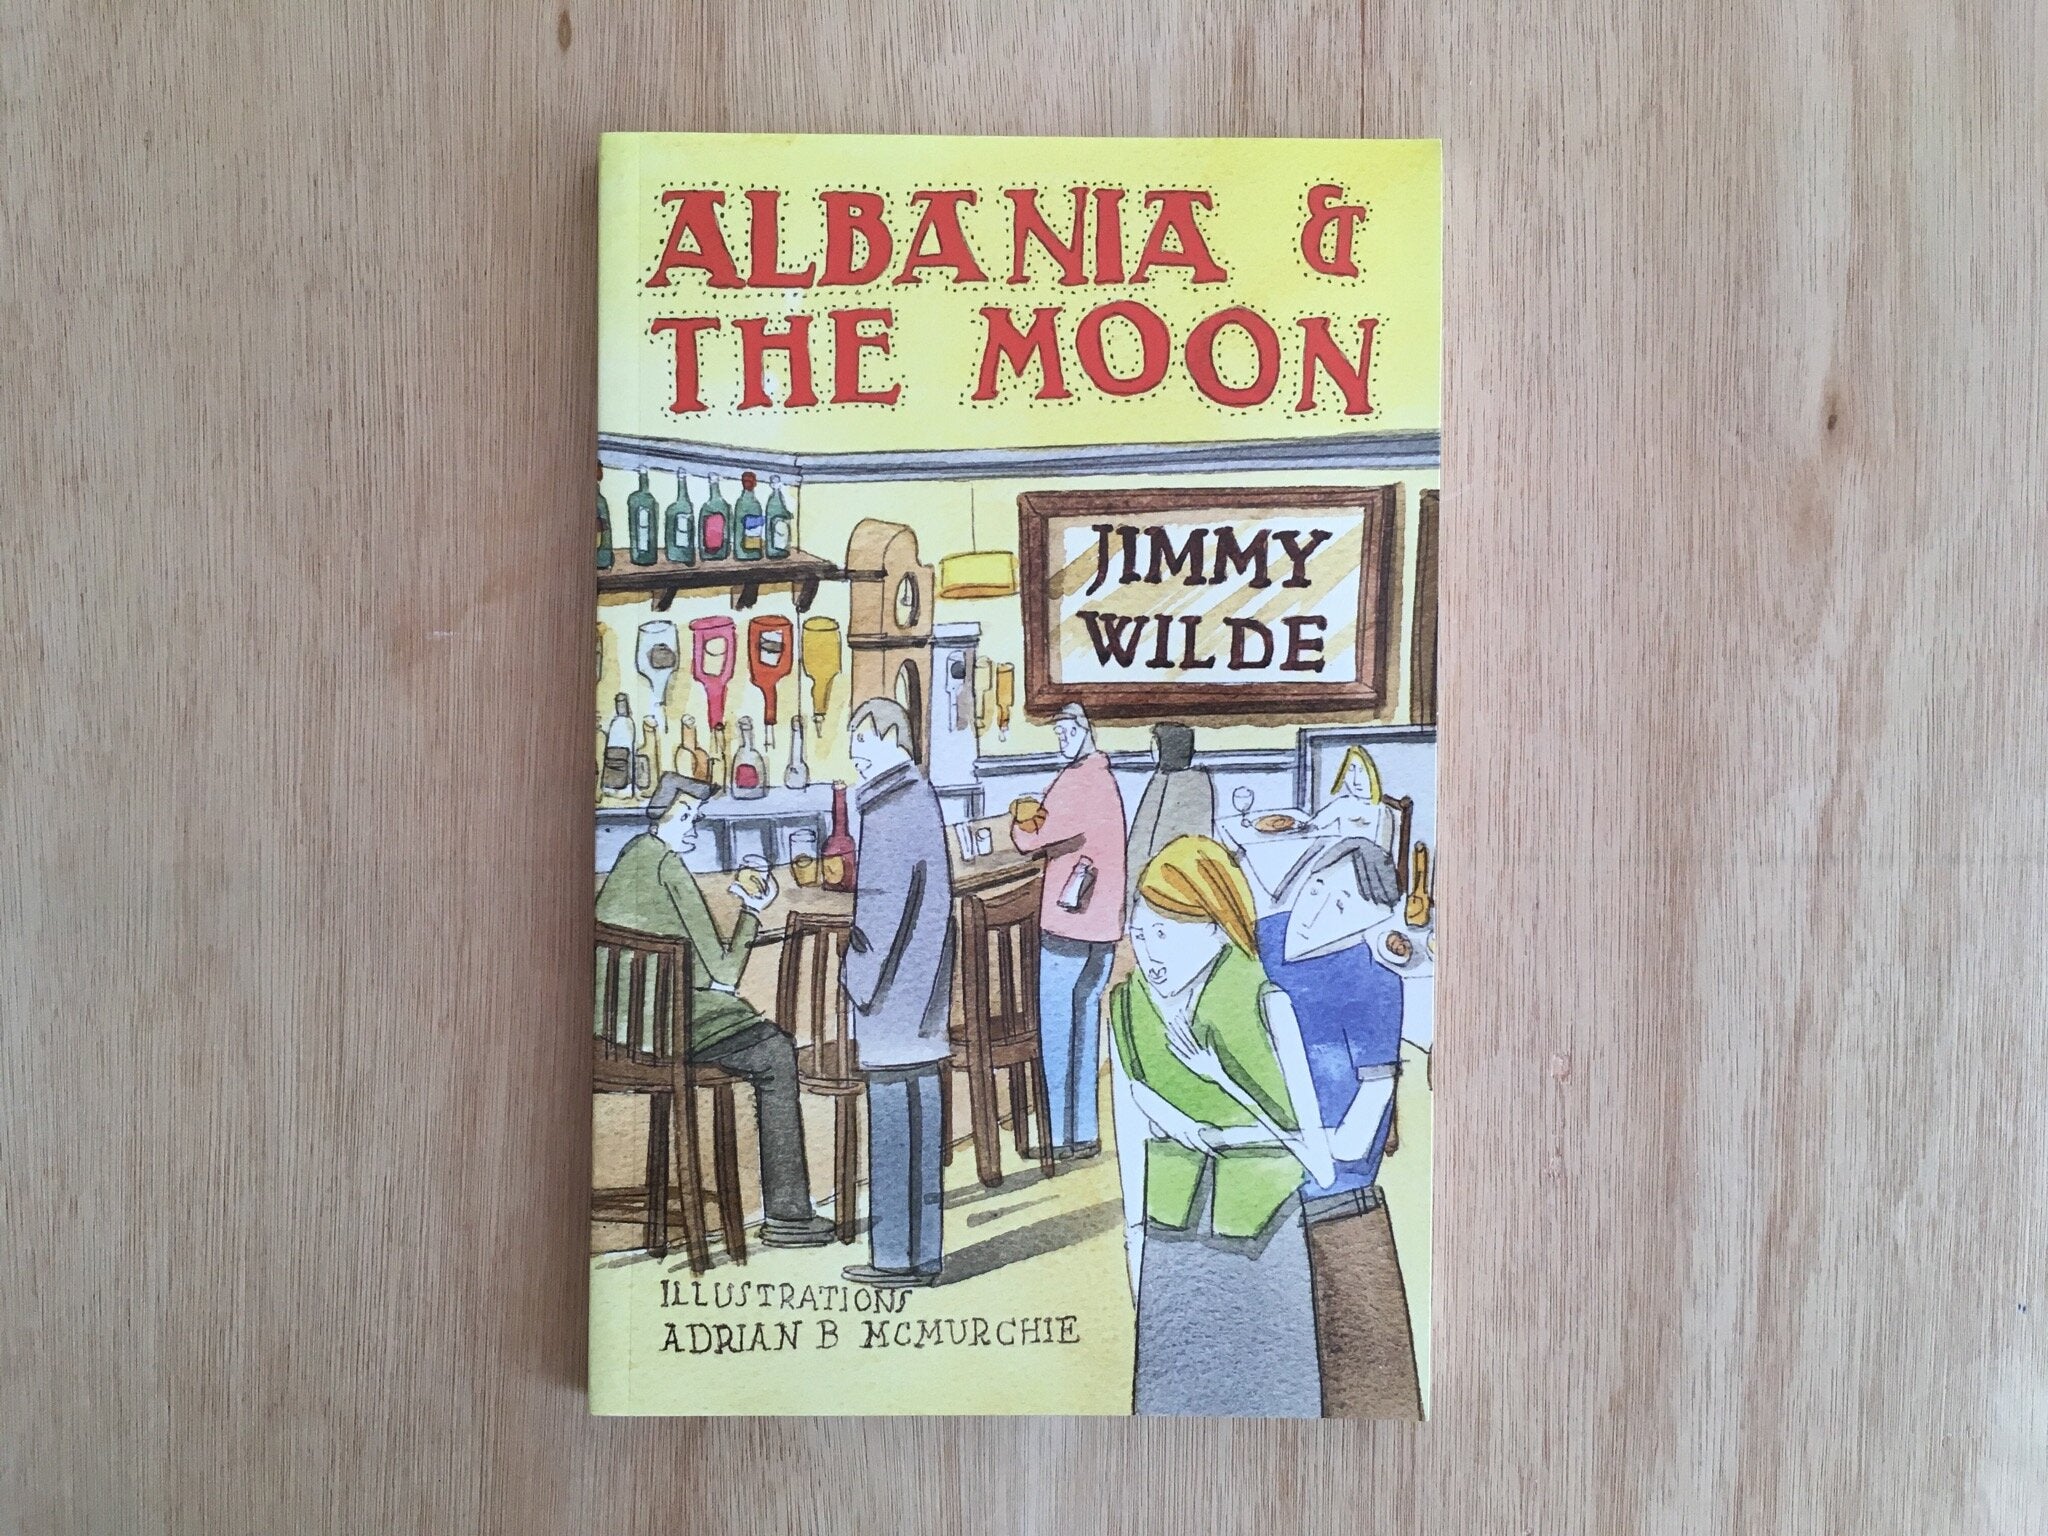 ALBANIA & THE MOON By Jimmy Wilde and Adrian B. McMurchie